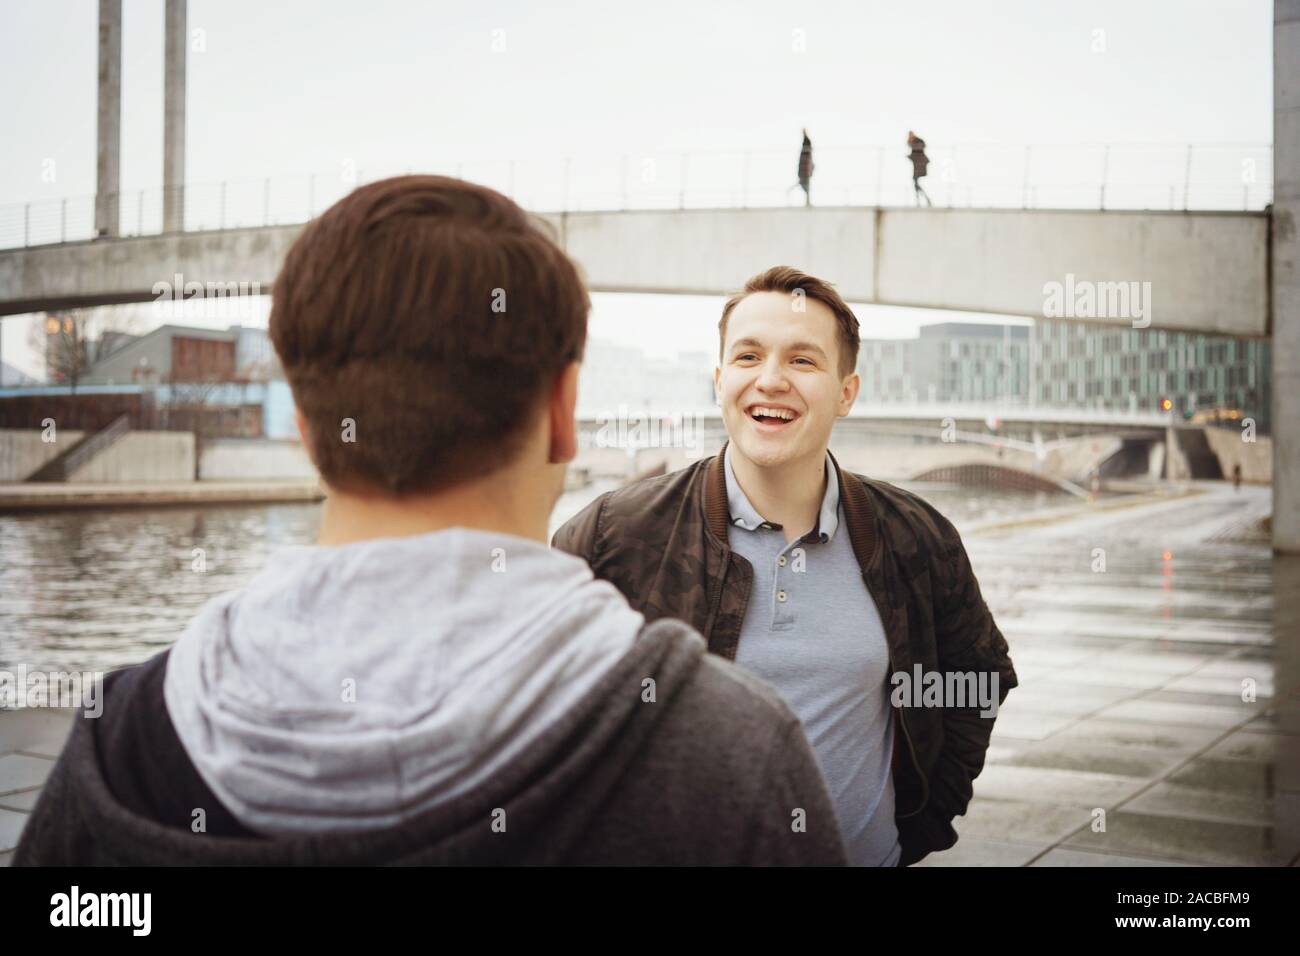 two male teenage friends having a fun conversation - lifestyle or city life concept - urban riverside location in Berlin Germany Stock Photo